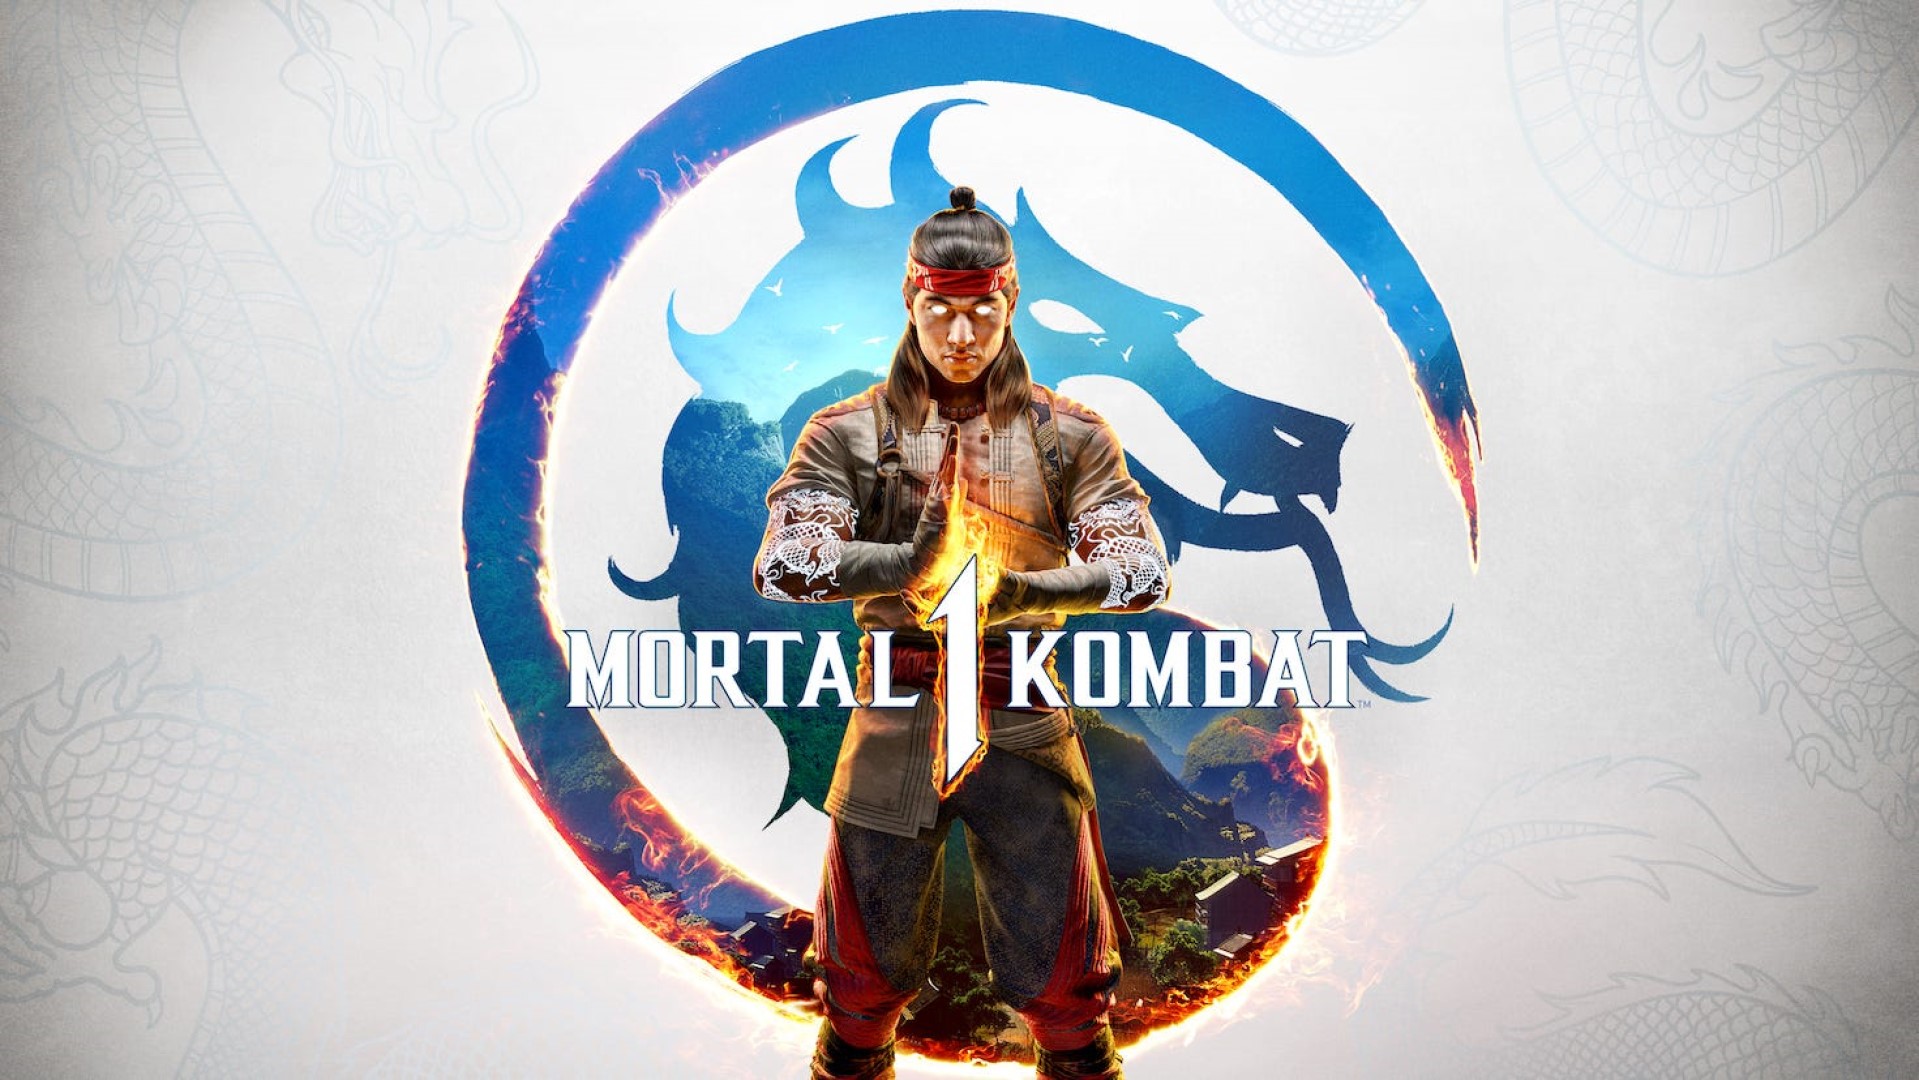 Mortal Kombat 1 – 9 New Details You Need to Know